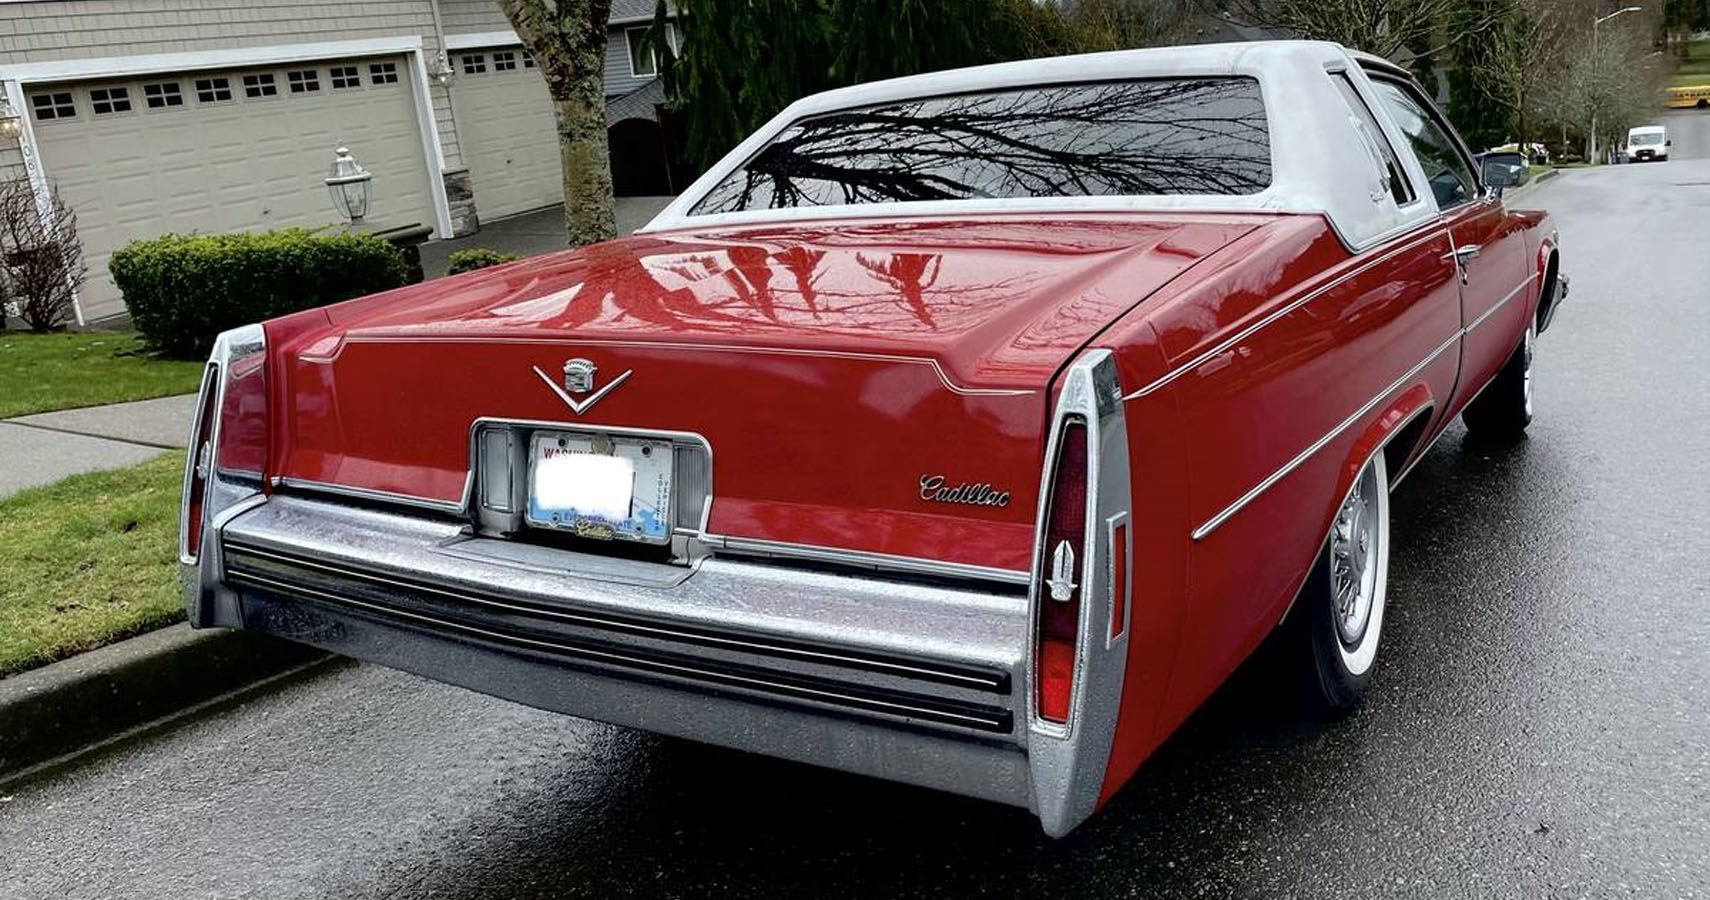 When Donnie Brasco First Drives His Cadillac Deville, It's A 2-Door Coupe